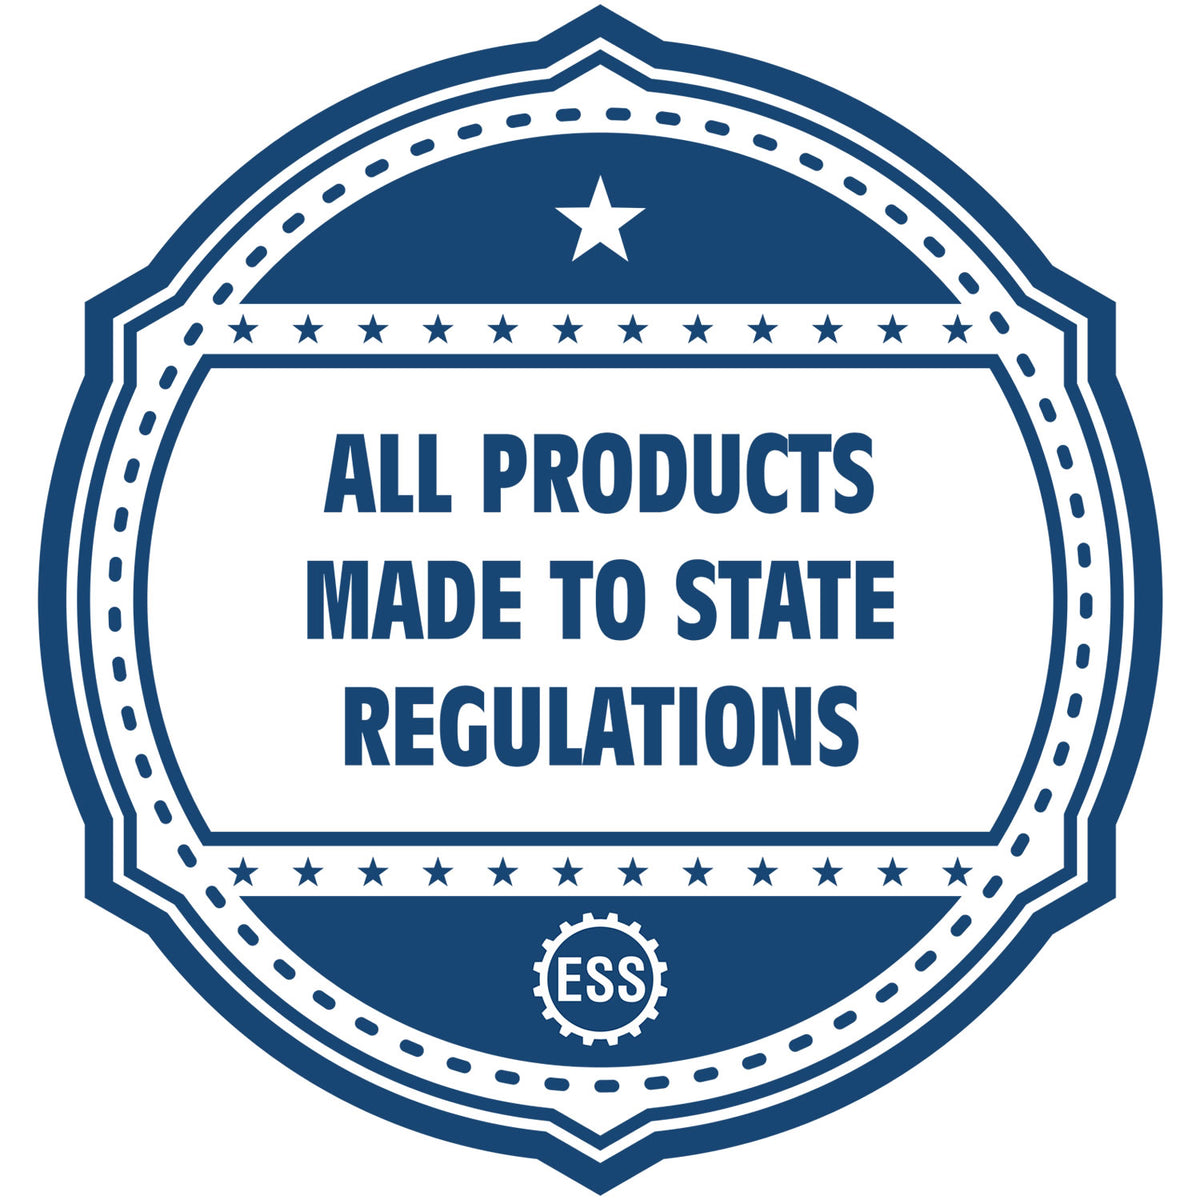 An icon or badge element for the Handheld Georgia Architect Seal Embosser showing that this product is made in compliance with state regulations.